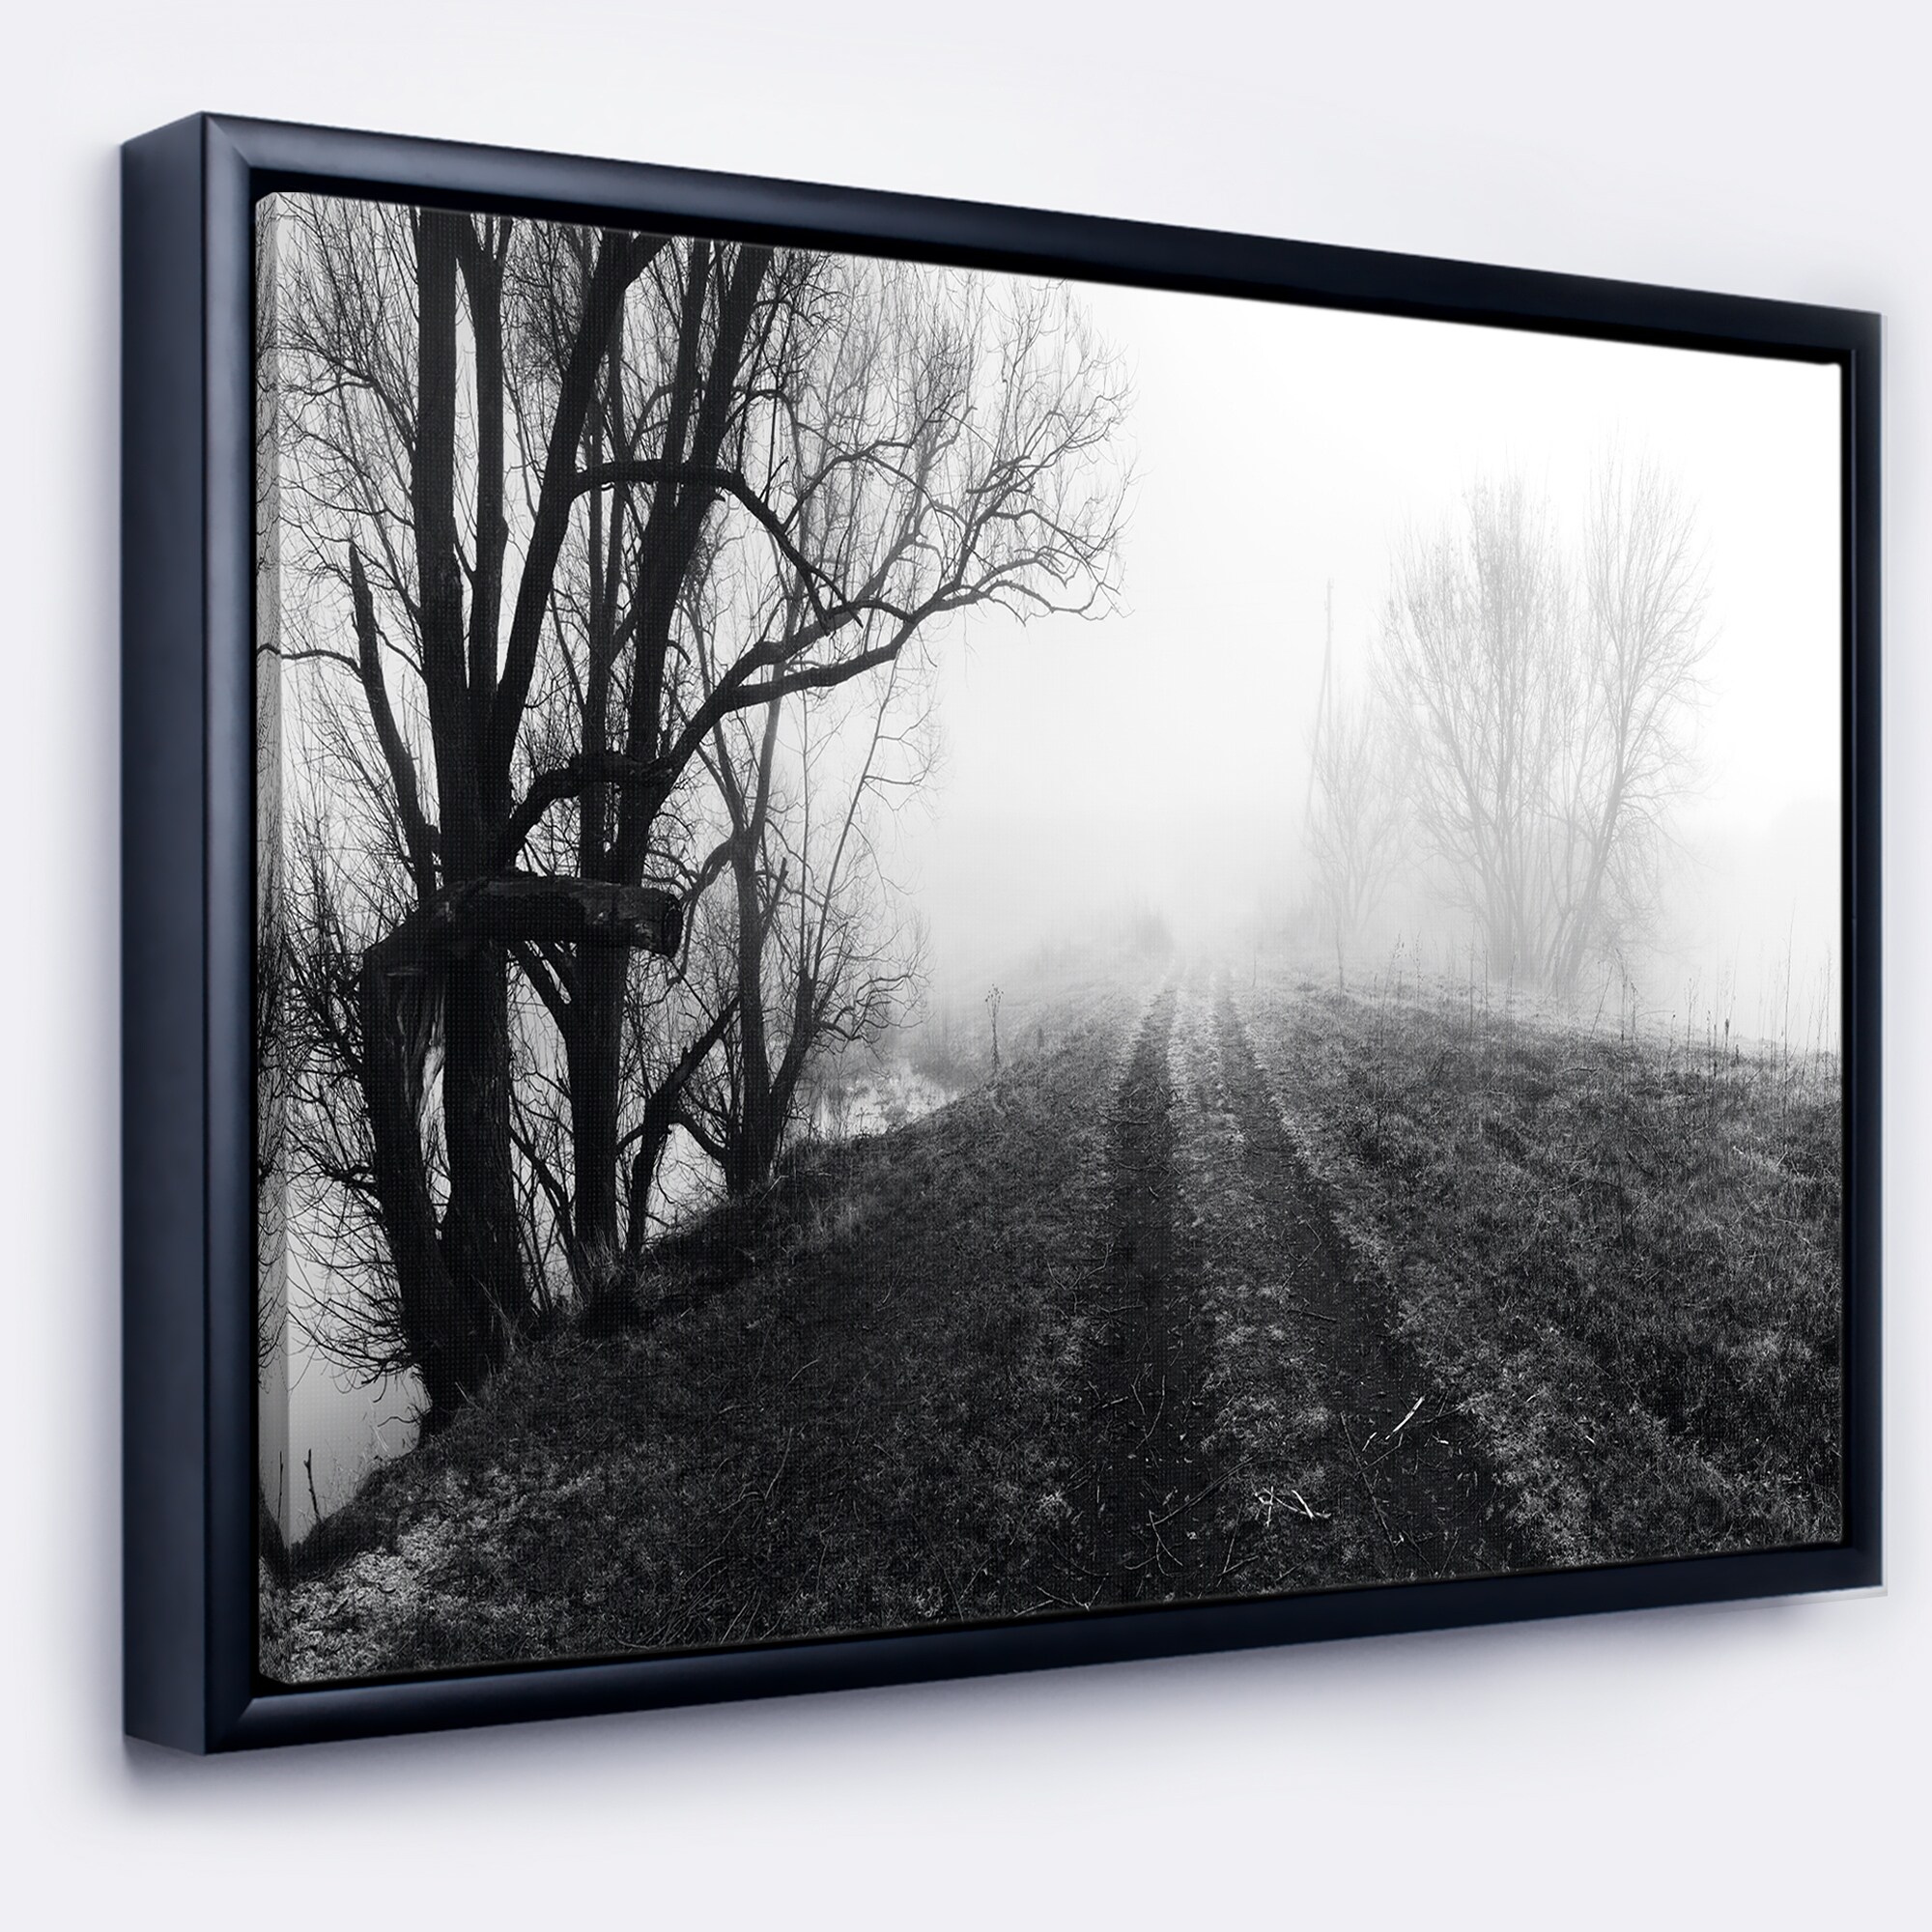 https://ak1.ostkcdn.com/images/products/is/images/direct/f166ae1a875f962425d48417000cabffb9972096/Designart-%27Black-and-White-Misty-Landscape-Panorama%27-Landscape-Framed-Canvas-Art-Print.jpg